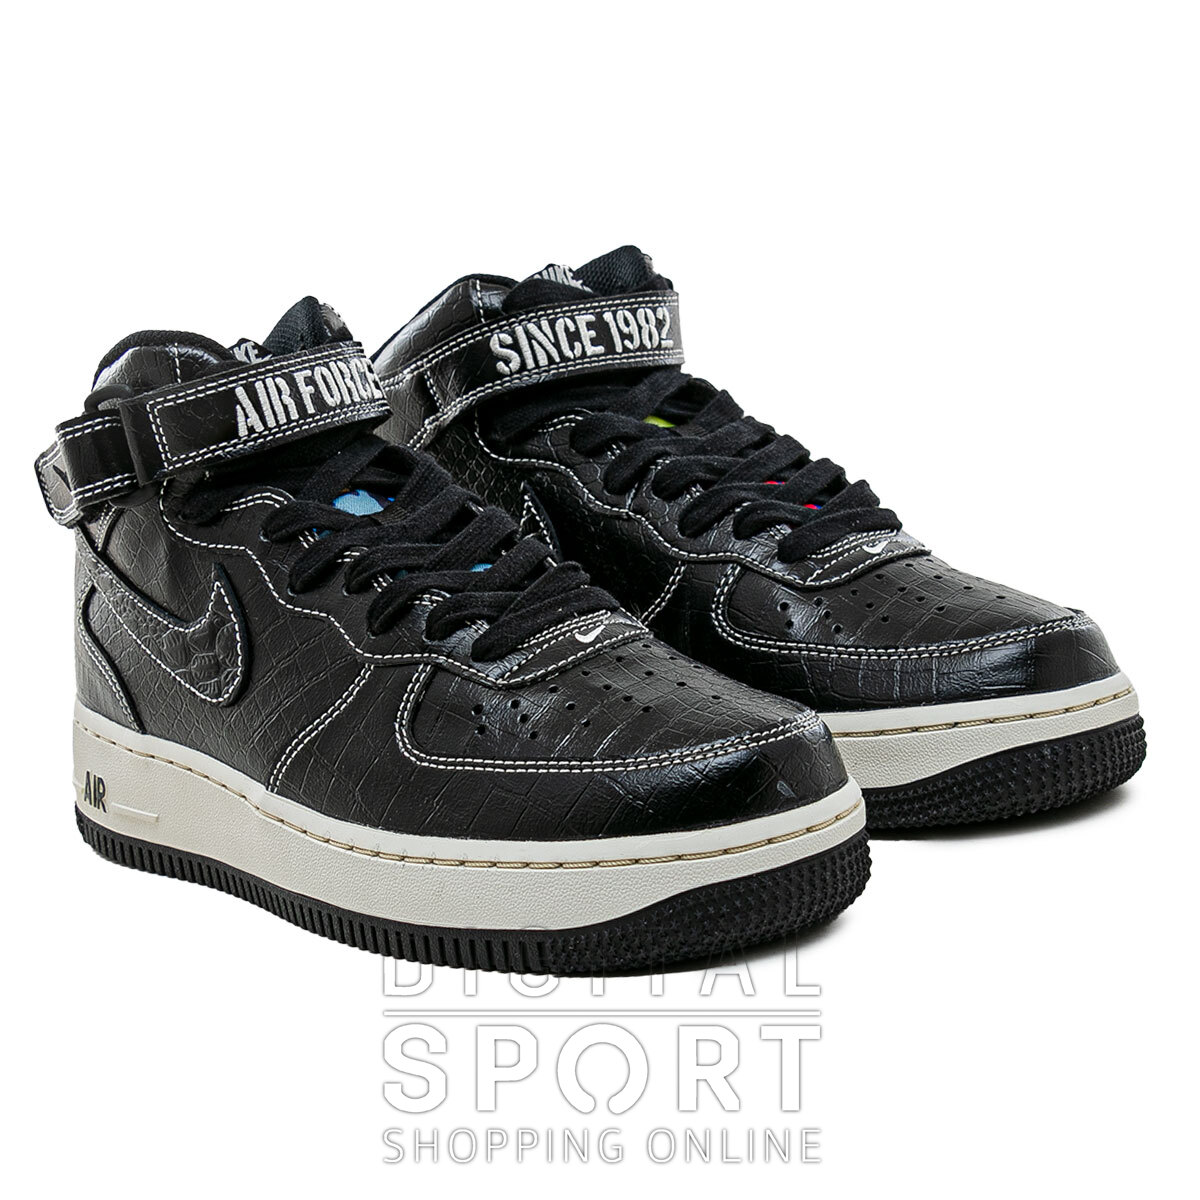 BOTAS AIR FORCE 1 MID OUR FORCE 1 NIKE | DIONYSOS